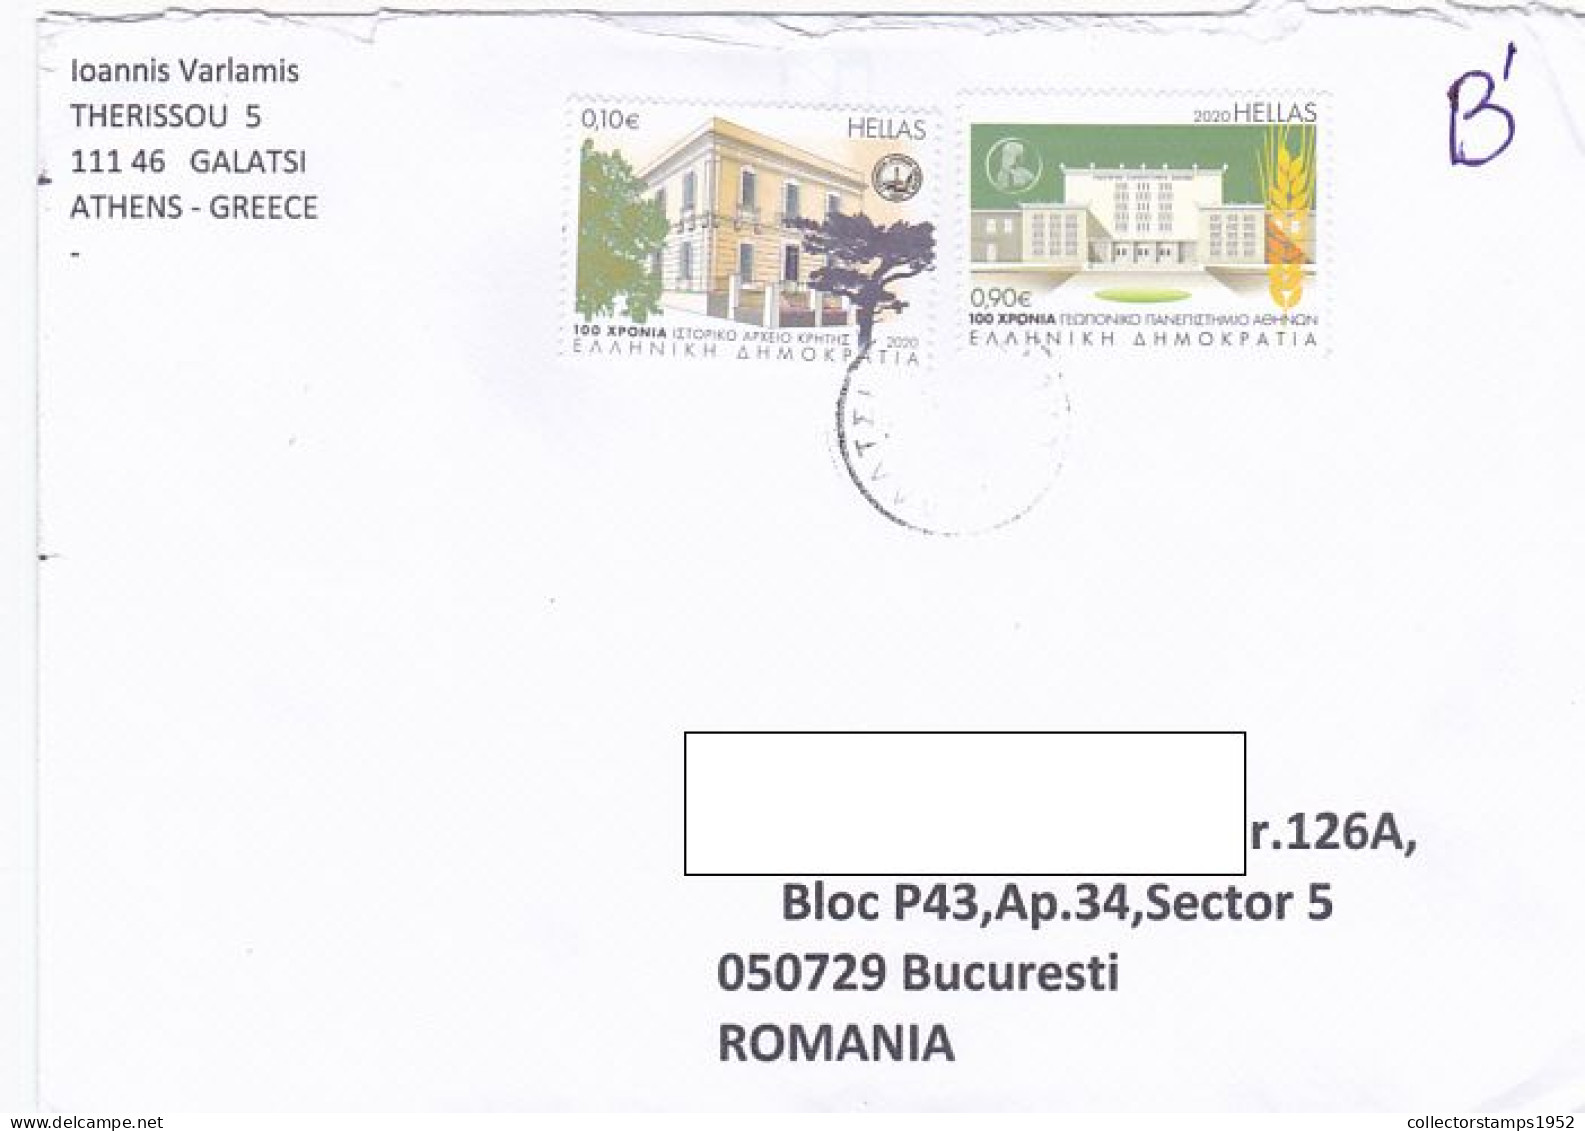 ARCHIVE BUILDING, AGRICULTURE UNIVERSITY, FINE STAMPS ON COVER, 2021, GREECE - Covers & Documents